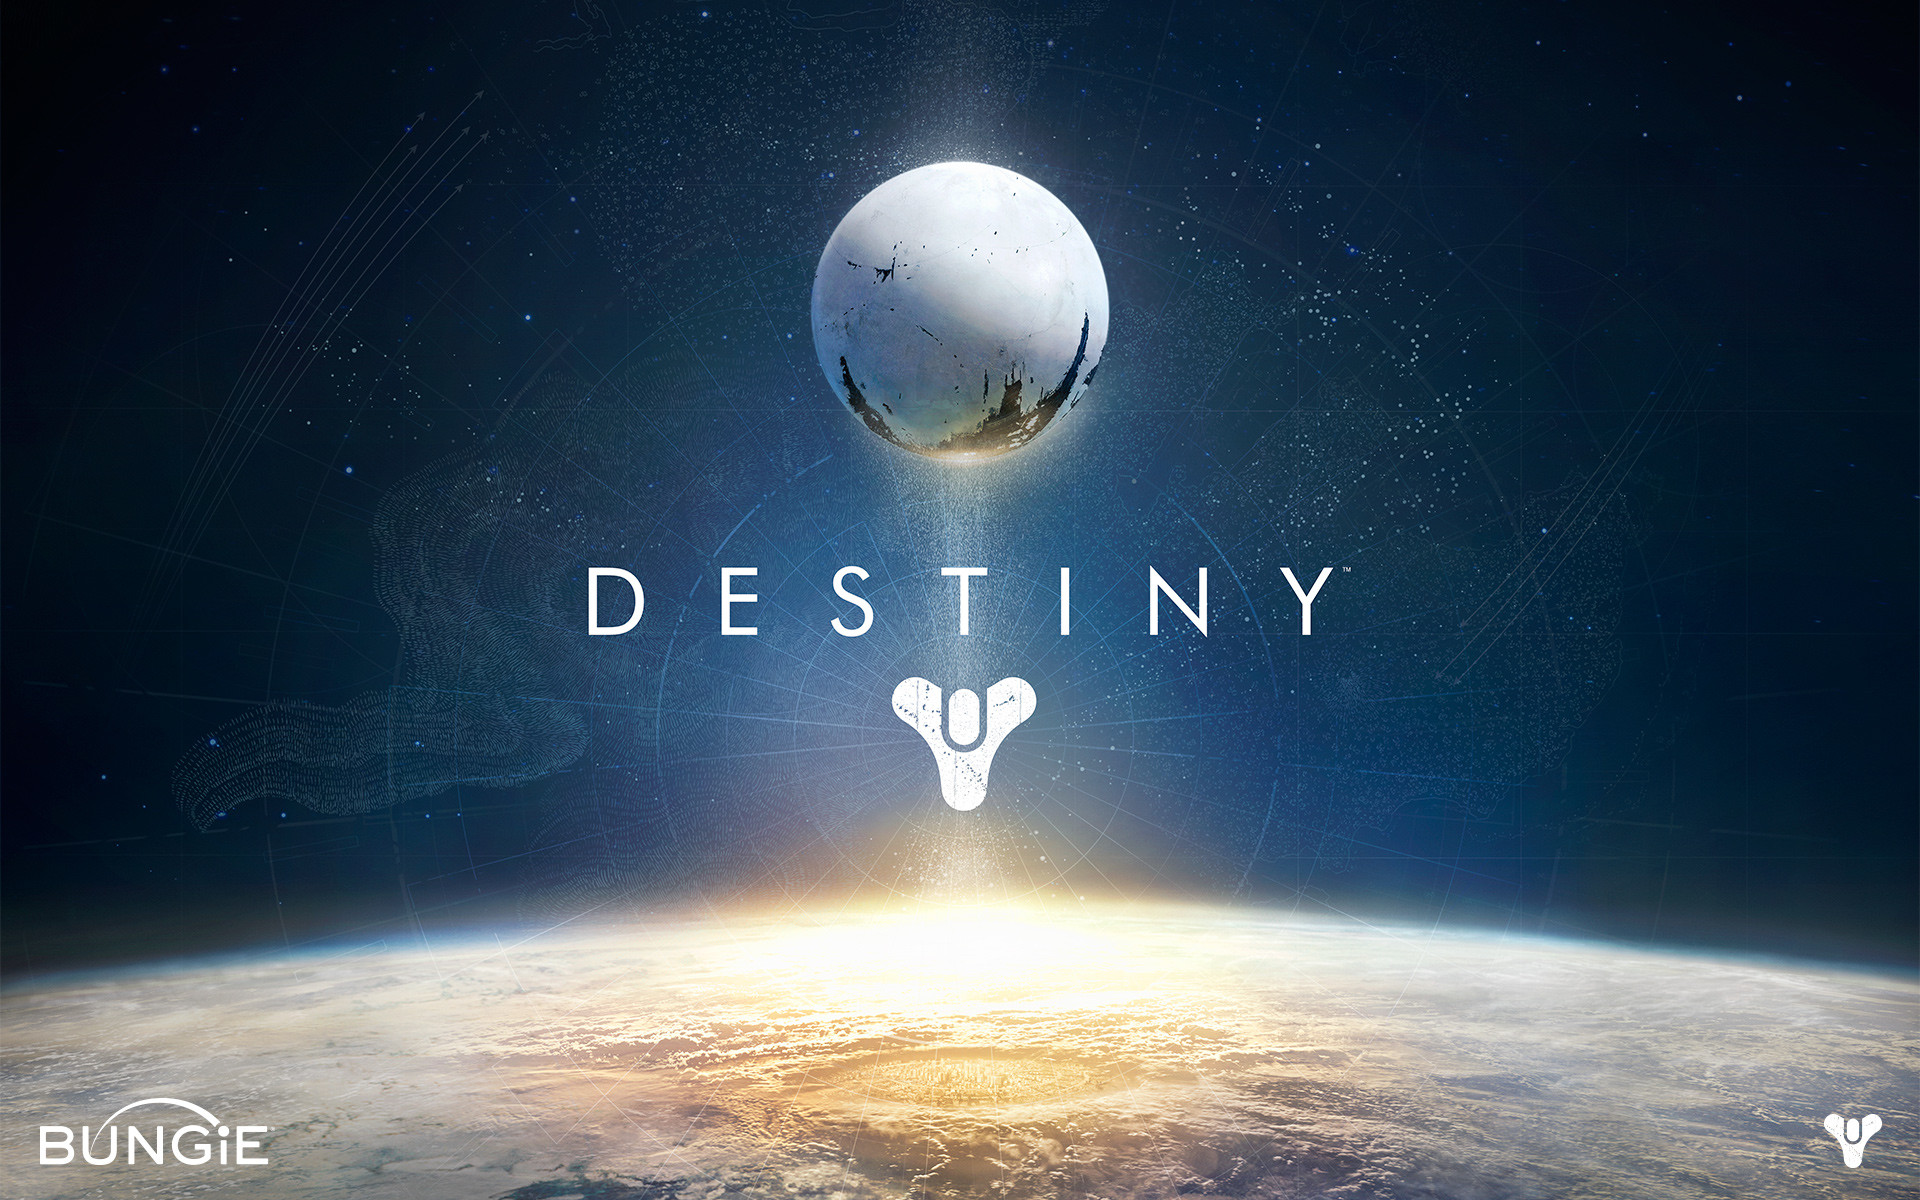 1920x1200 Destiny Sets New PlayStation Record, The Taken King Pulls in More Players  Than Destiny's Original Launch